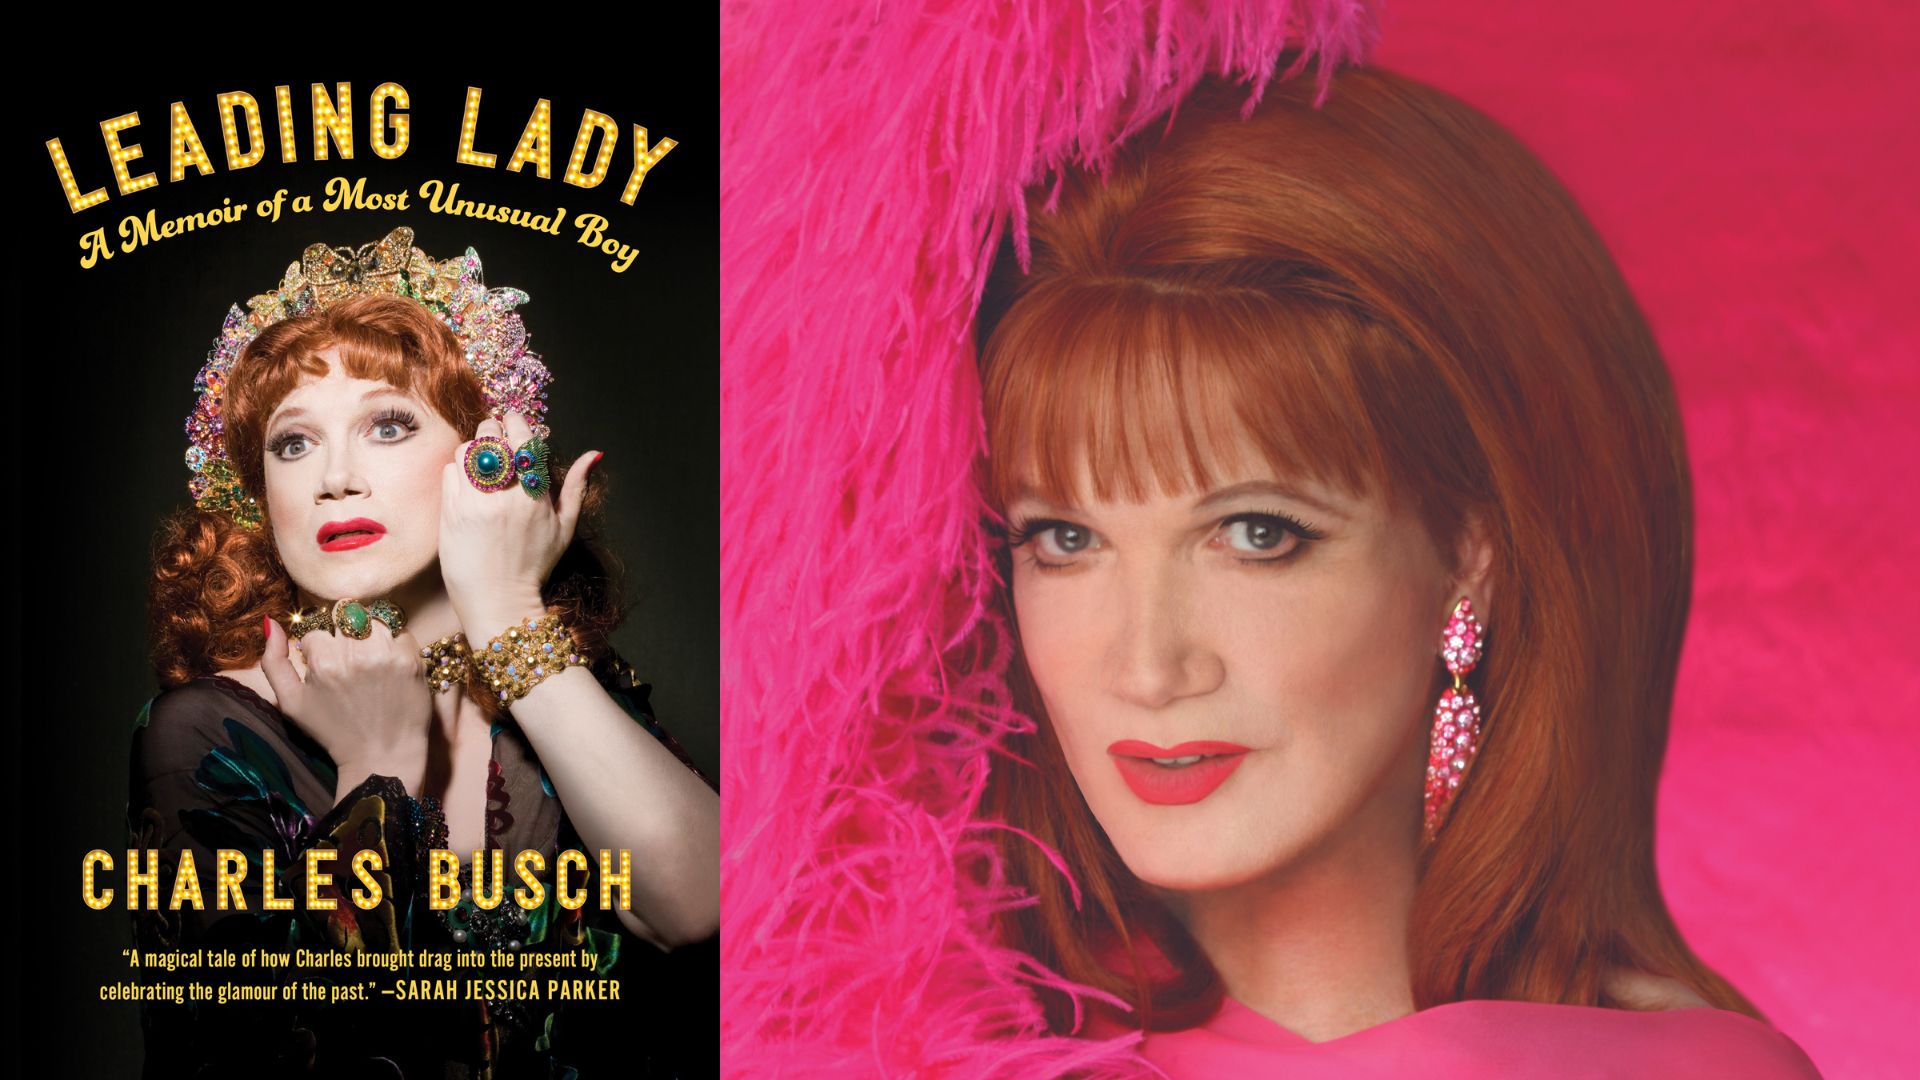 A most unusual leading lady: an interview with Charles Busch - Philadelphia  Gay News